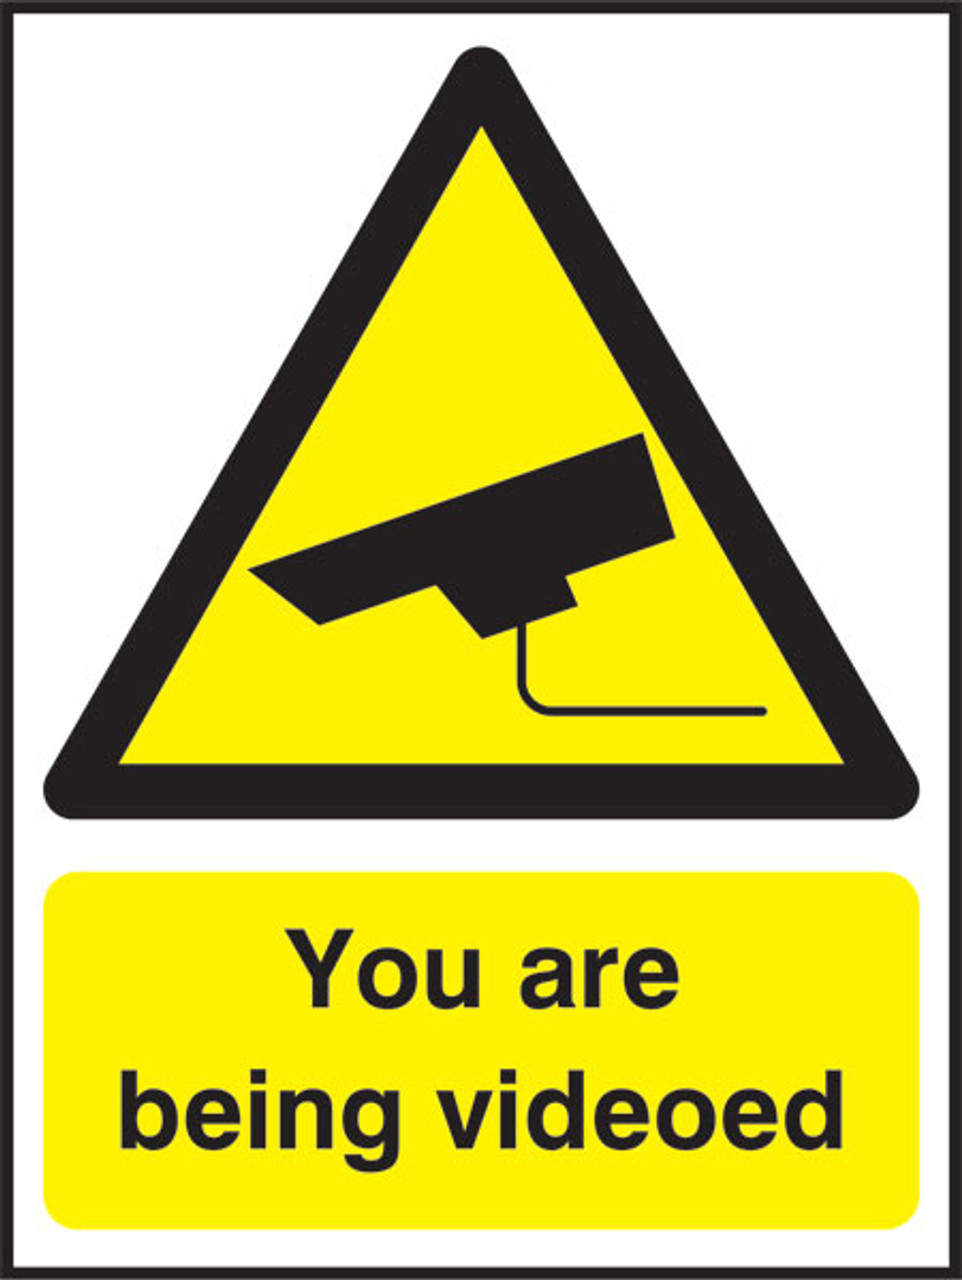 You are being videoed.